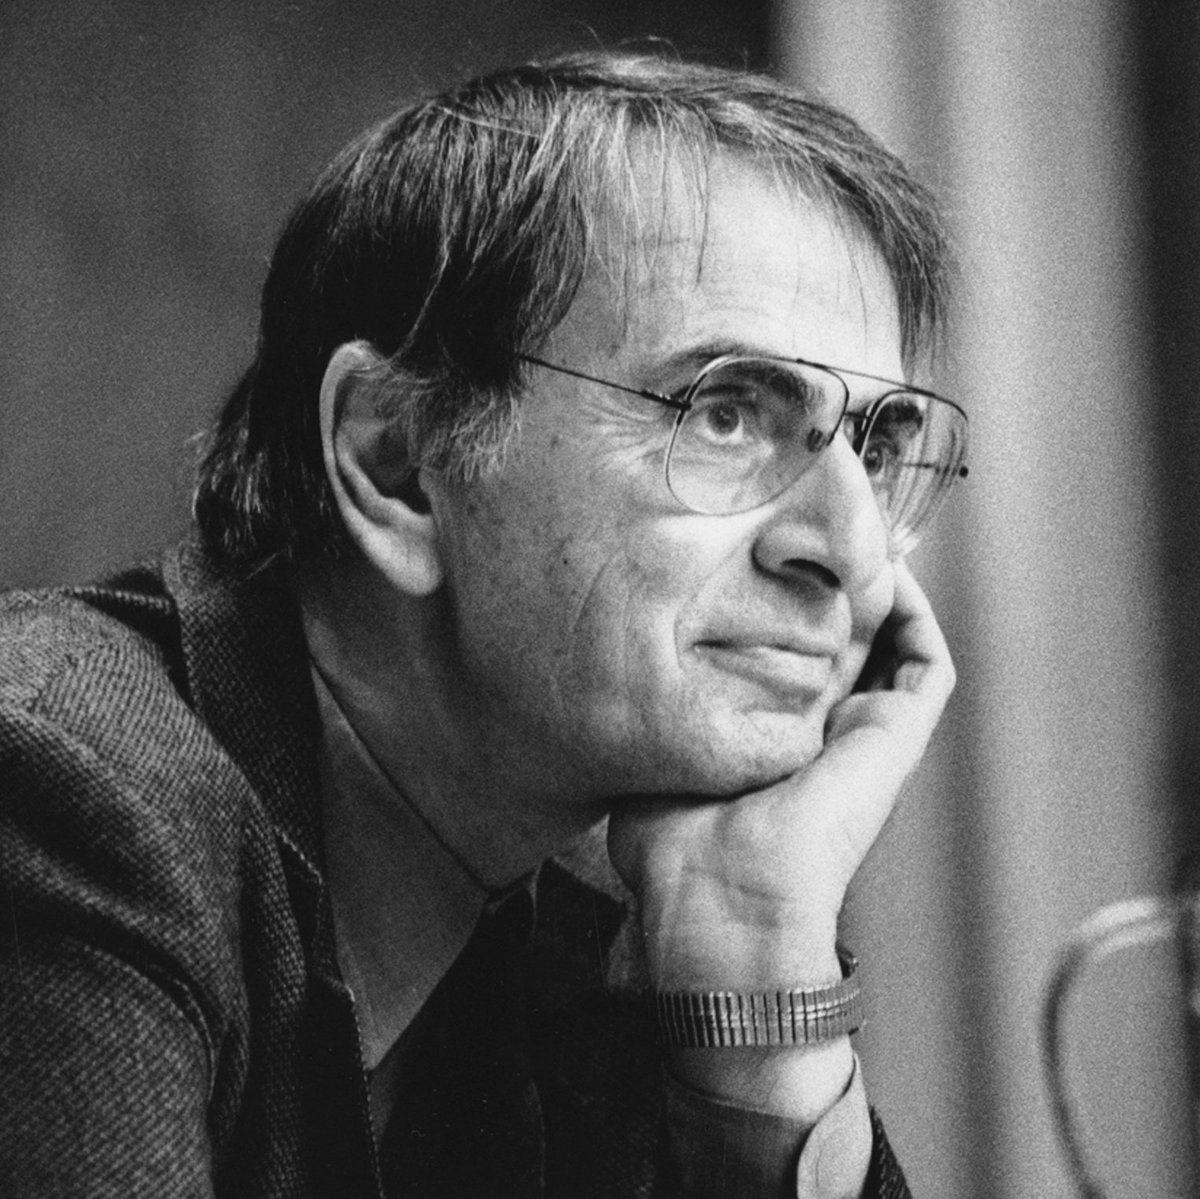 What is your favourite thing about Carl Sagan? ( Honest answer only)